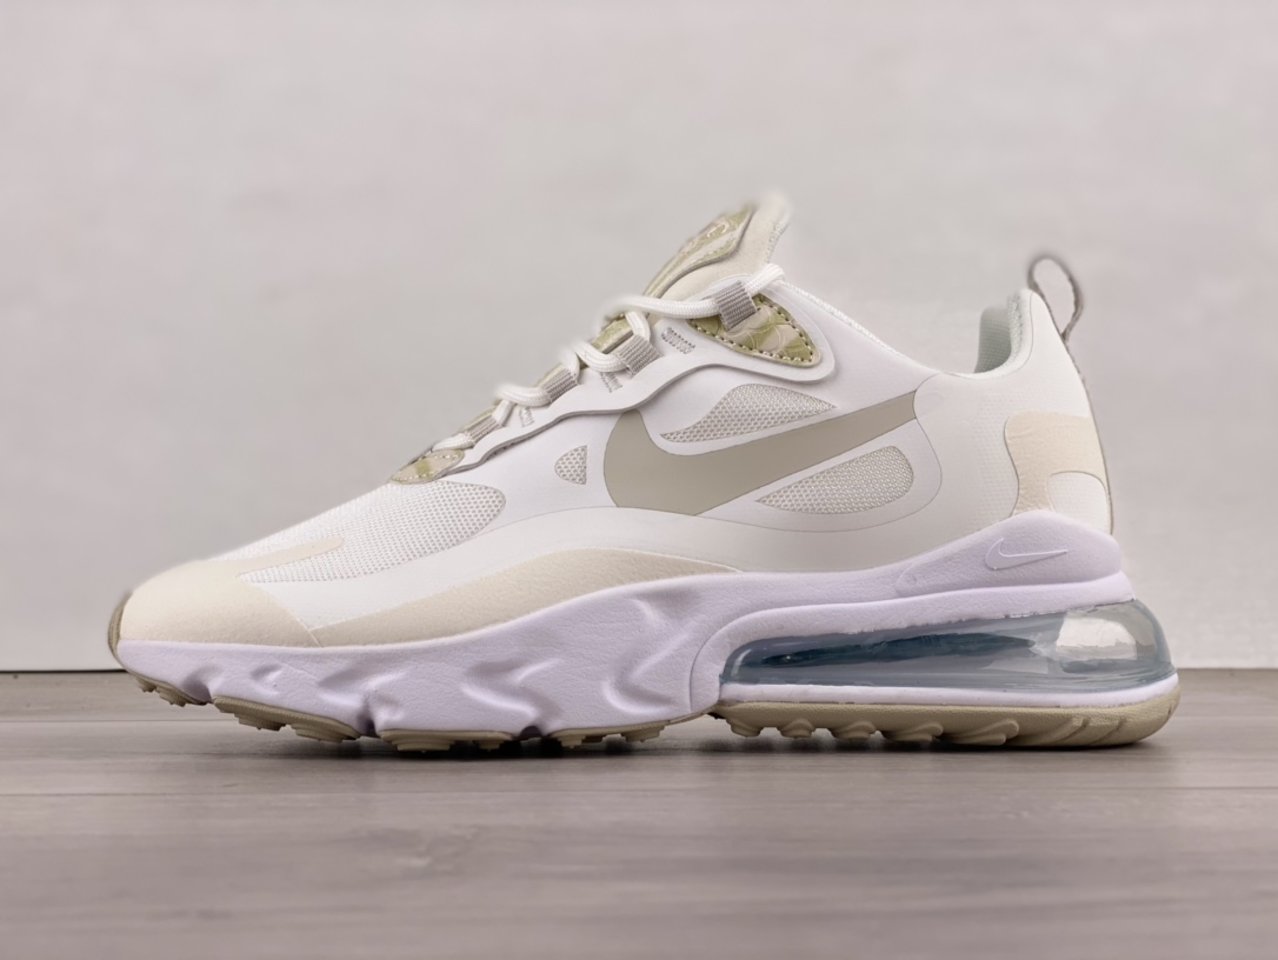 2021 Best Selling Nike Air Max 270 React Light Bone Outlet Sale CV8815-100